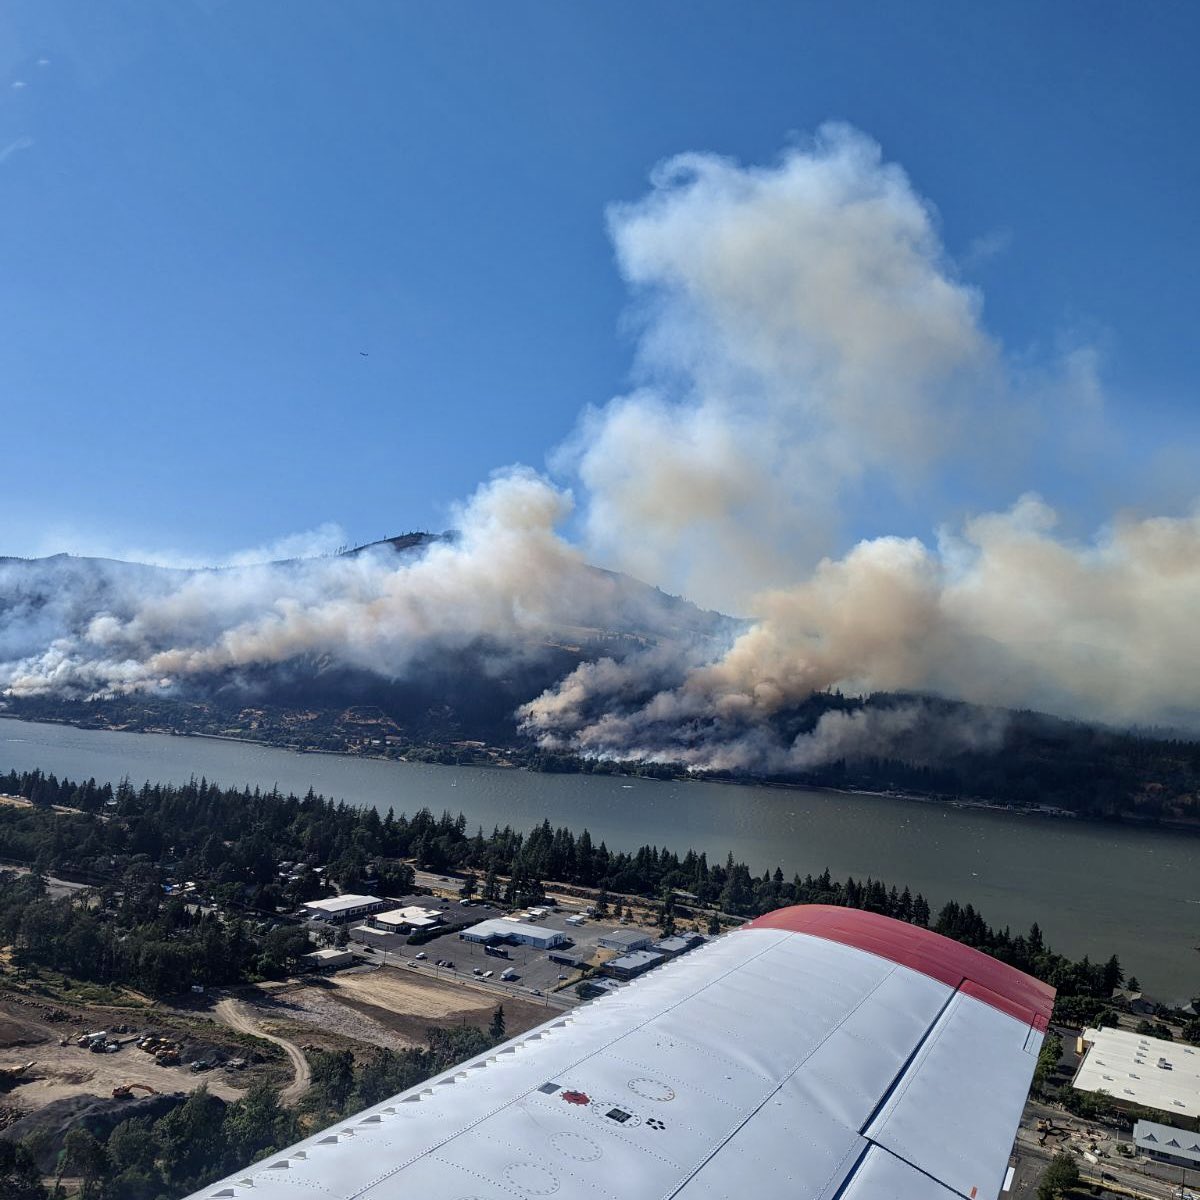 #WaWILDFIRE UPDATE #Tunnel5Fire indeterminate acreage and Skamania Sheriff’s Office expanded evacuations. Red Cross is at the fairgrounds to aid displaced folks. Unconfirmed amount of structures lost, power being shut off to some locations. Please avoid area.